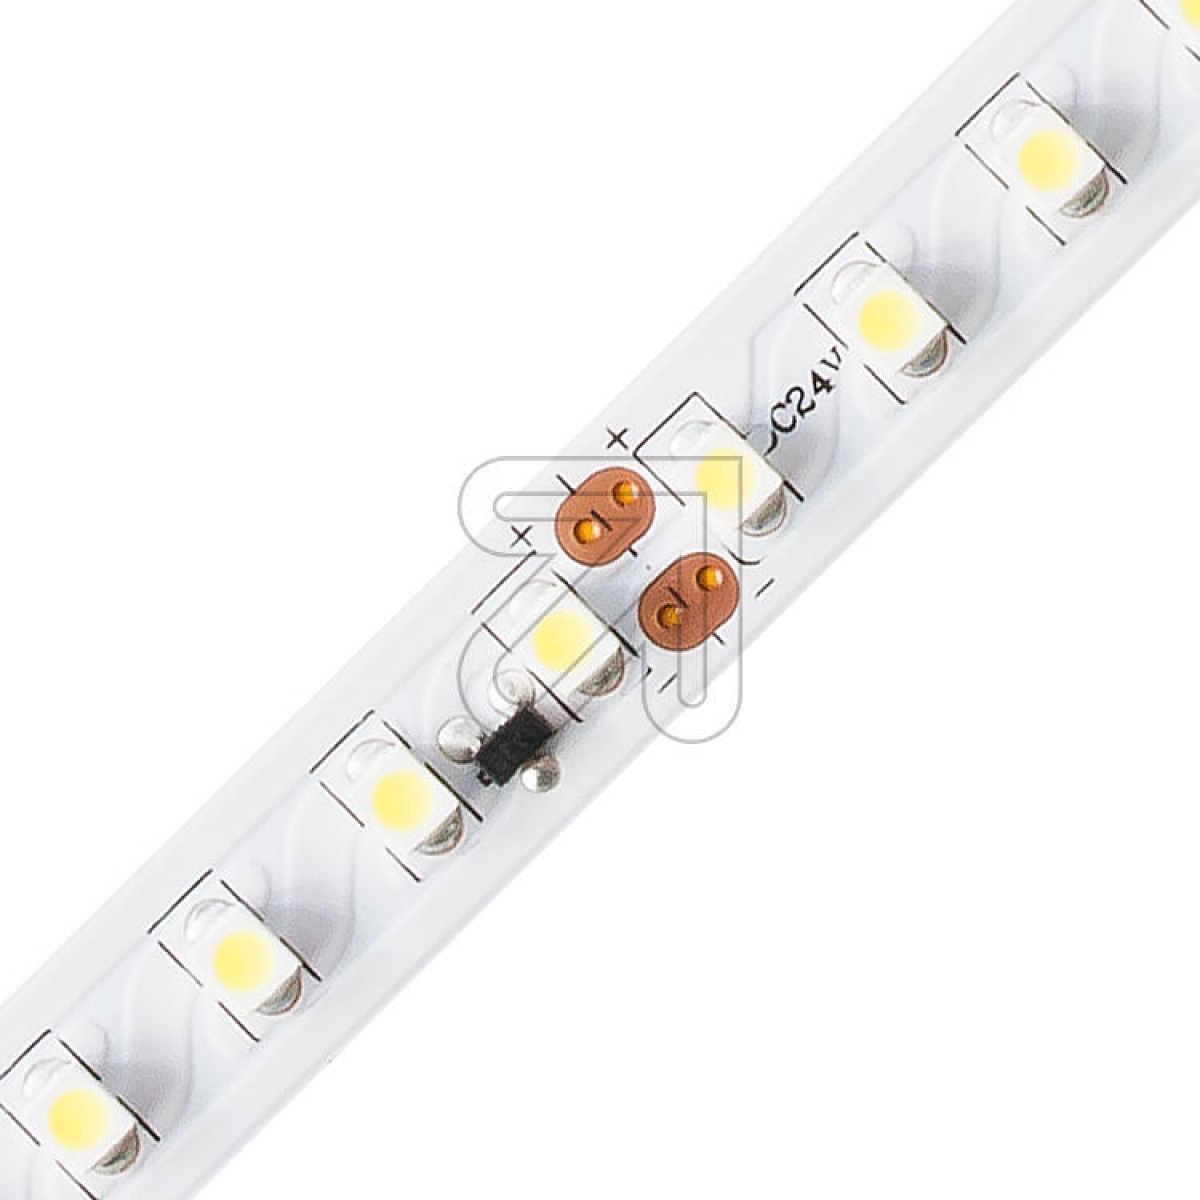 EVNIC Super LED strips roll 5m candle 74W IP20 ICSB2024603527 10mm 24V/DCArticle-No: 686755